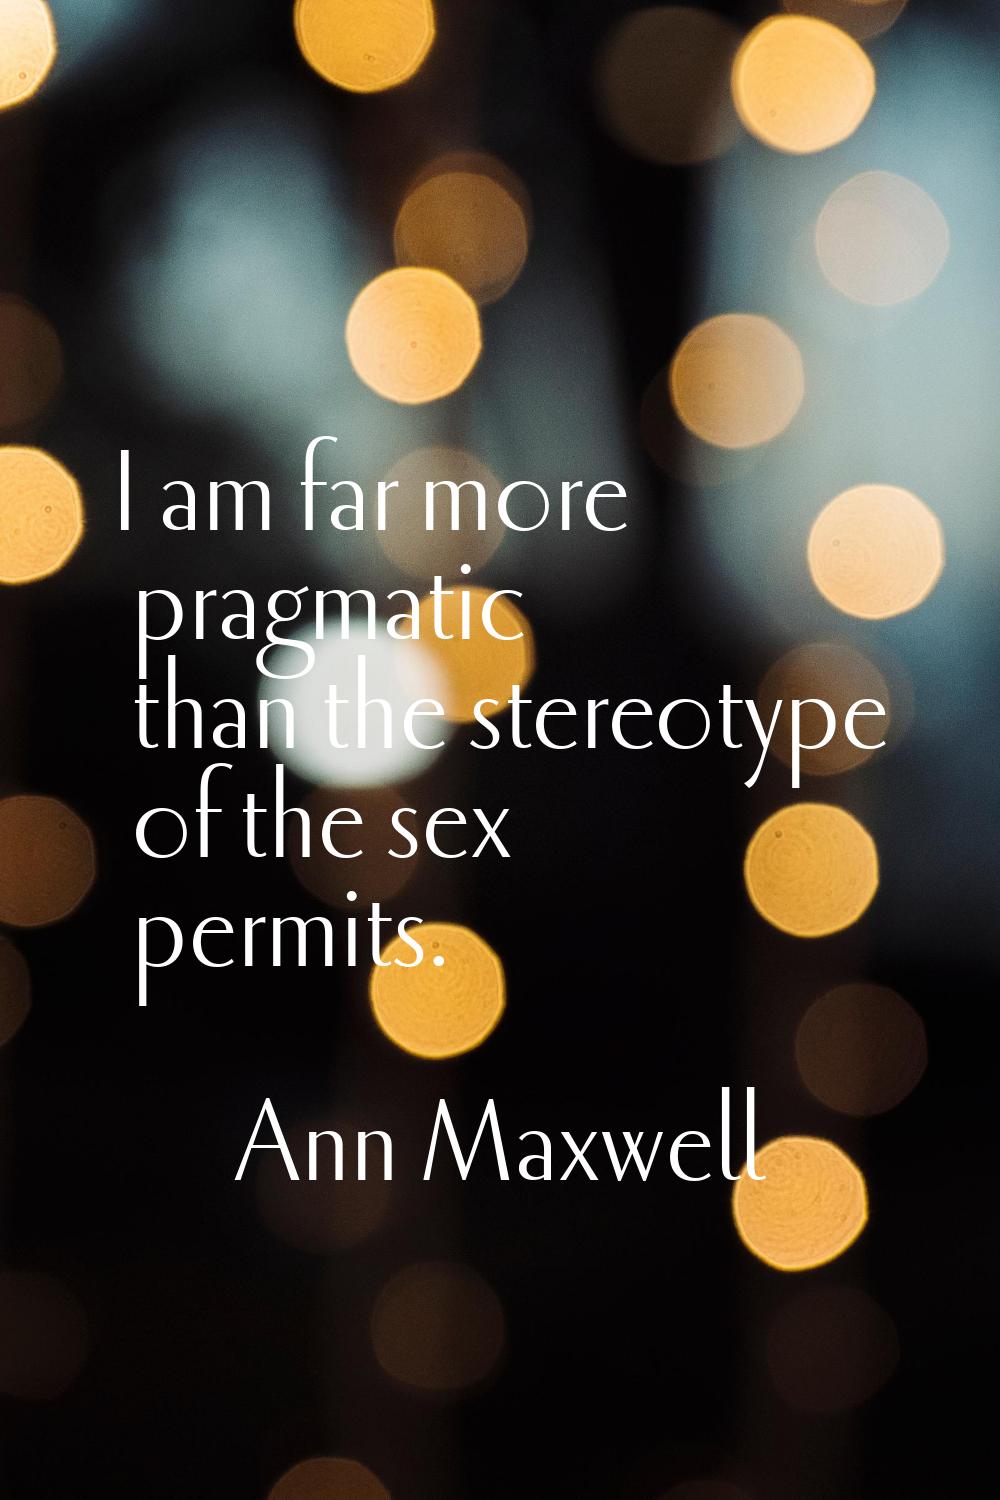 I am far more pragmatic than the stereotype of the sex permits.